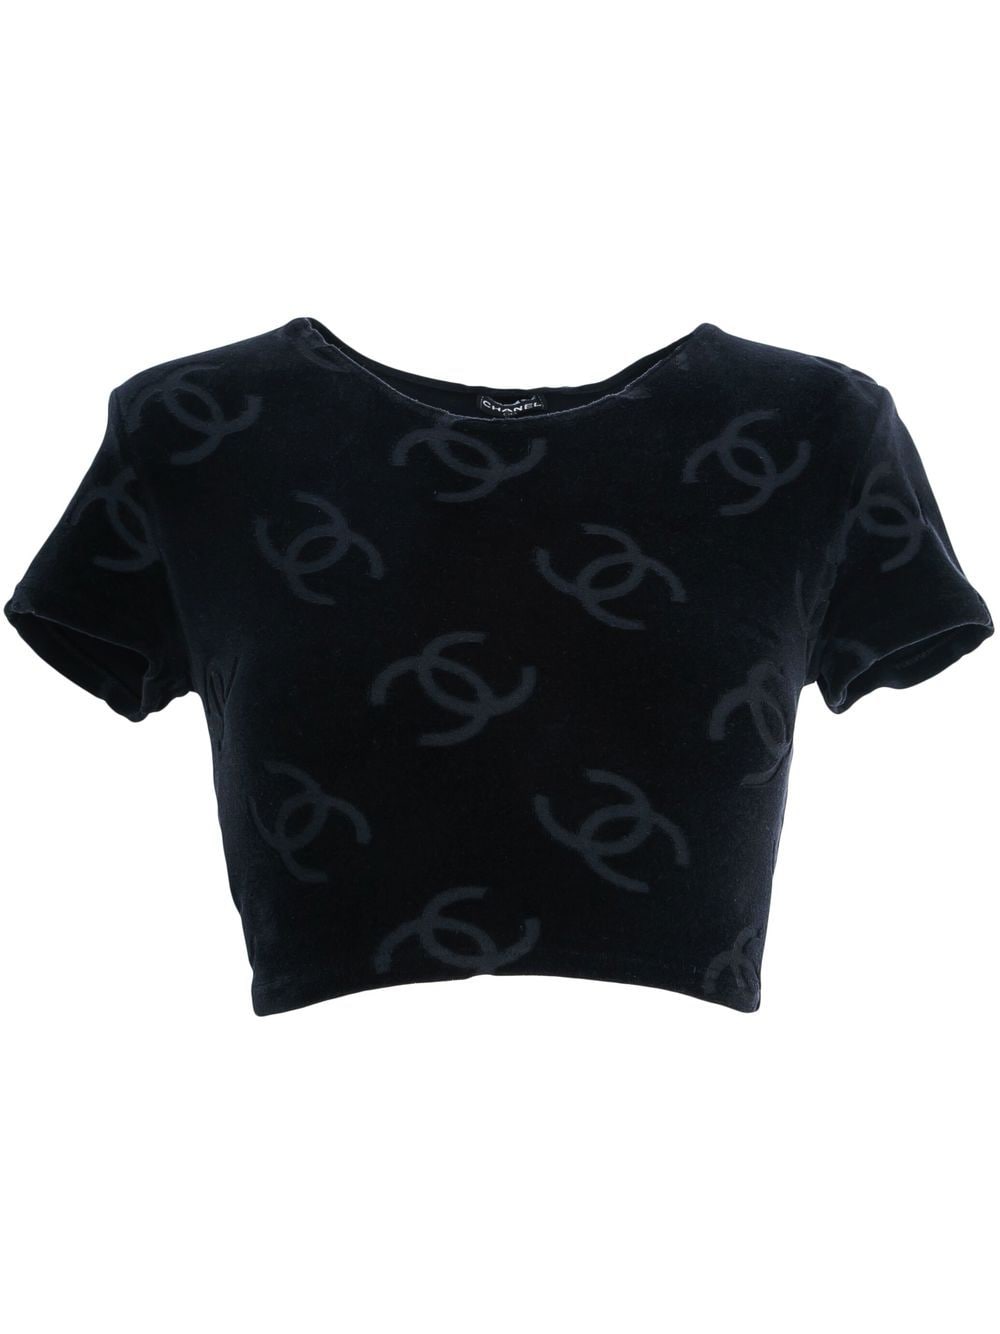 CHANEL Pre-Owned 1990s CC logo-print crop top - Black von CHANEL Pre-Owned